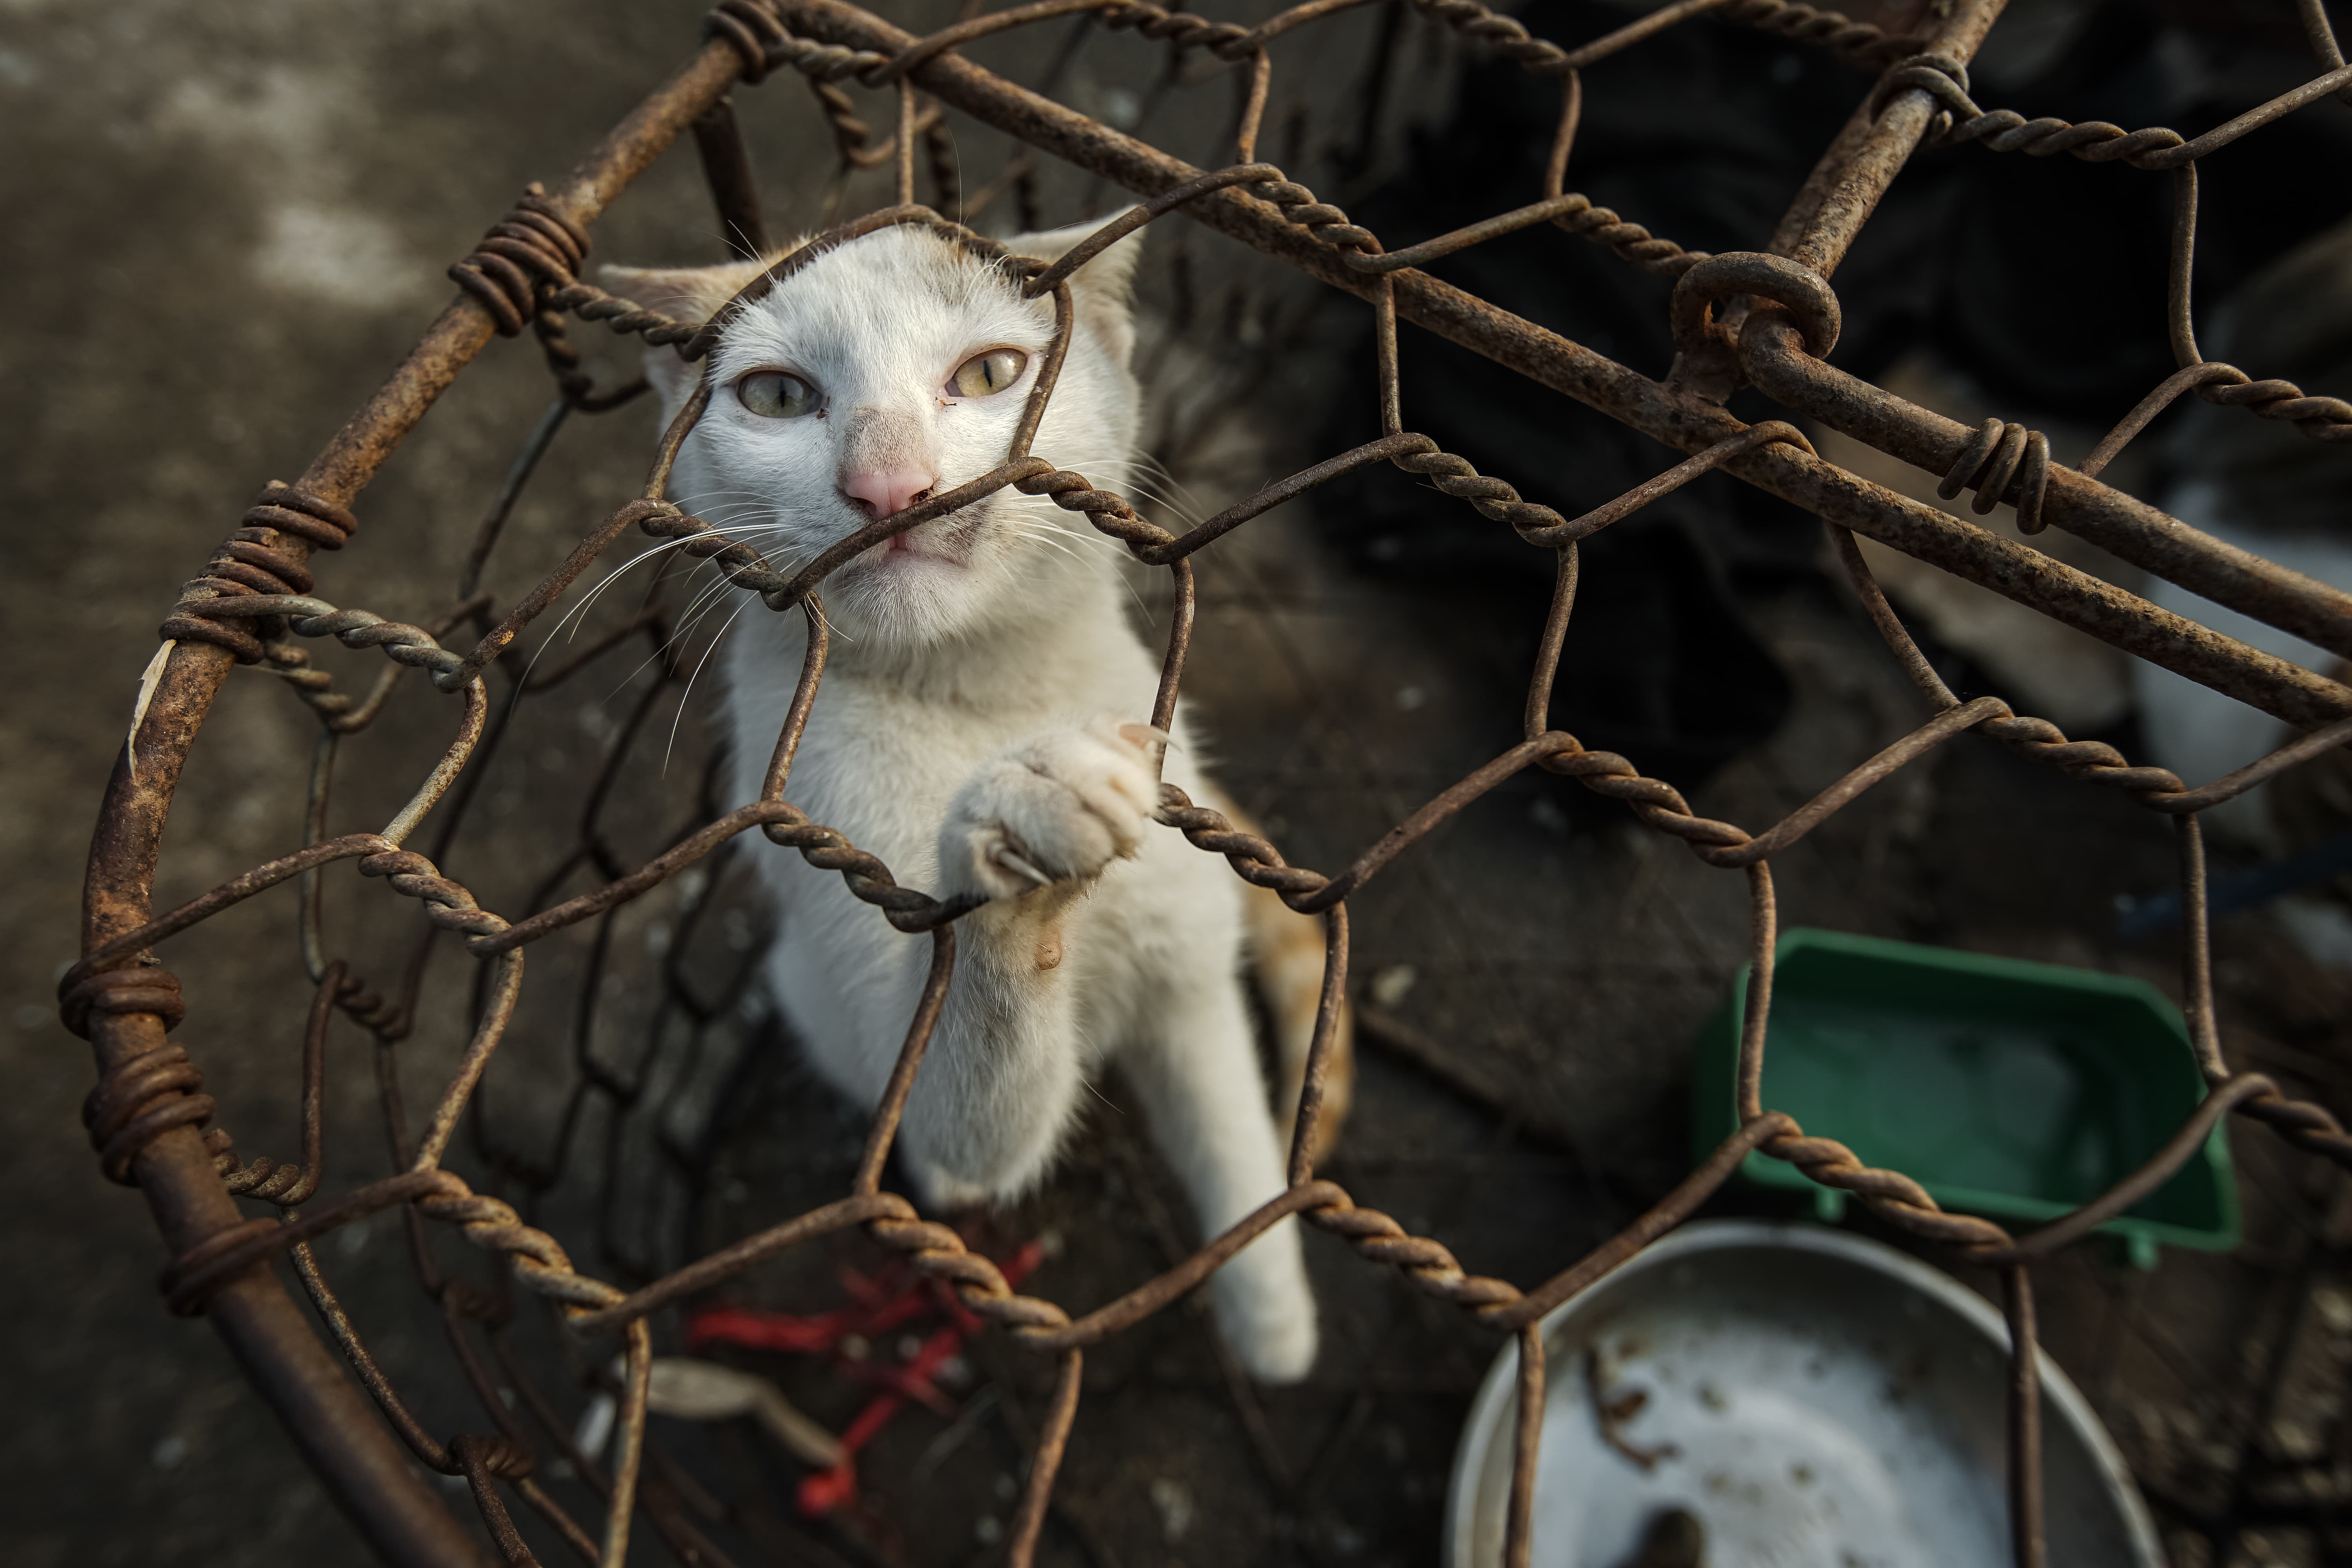 Help us end the dog and cat meat trade